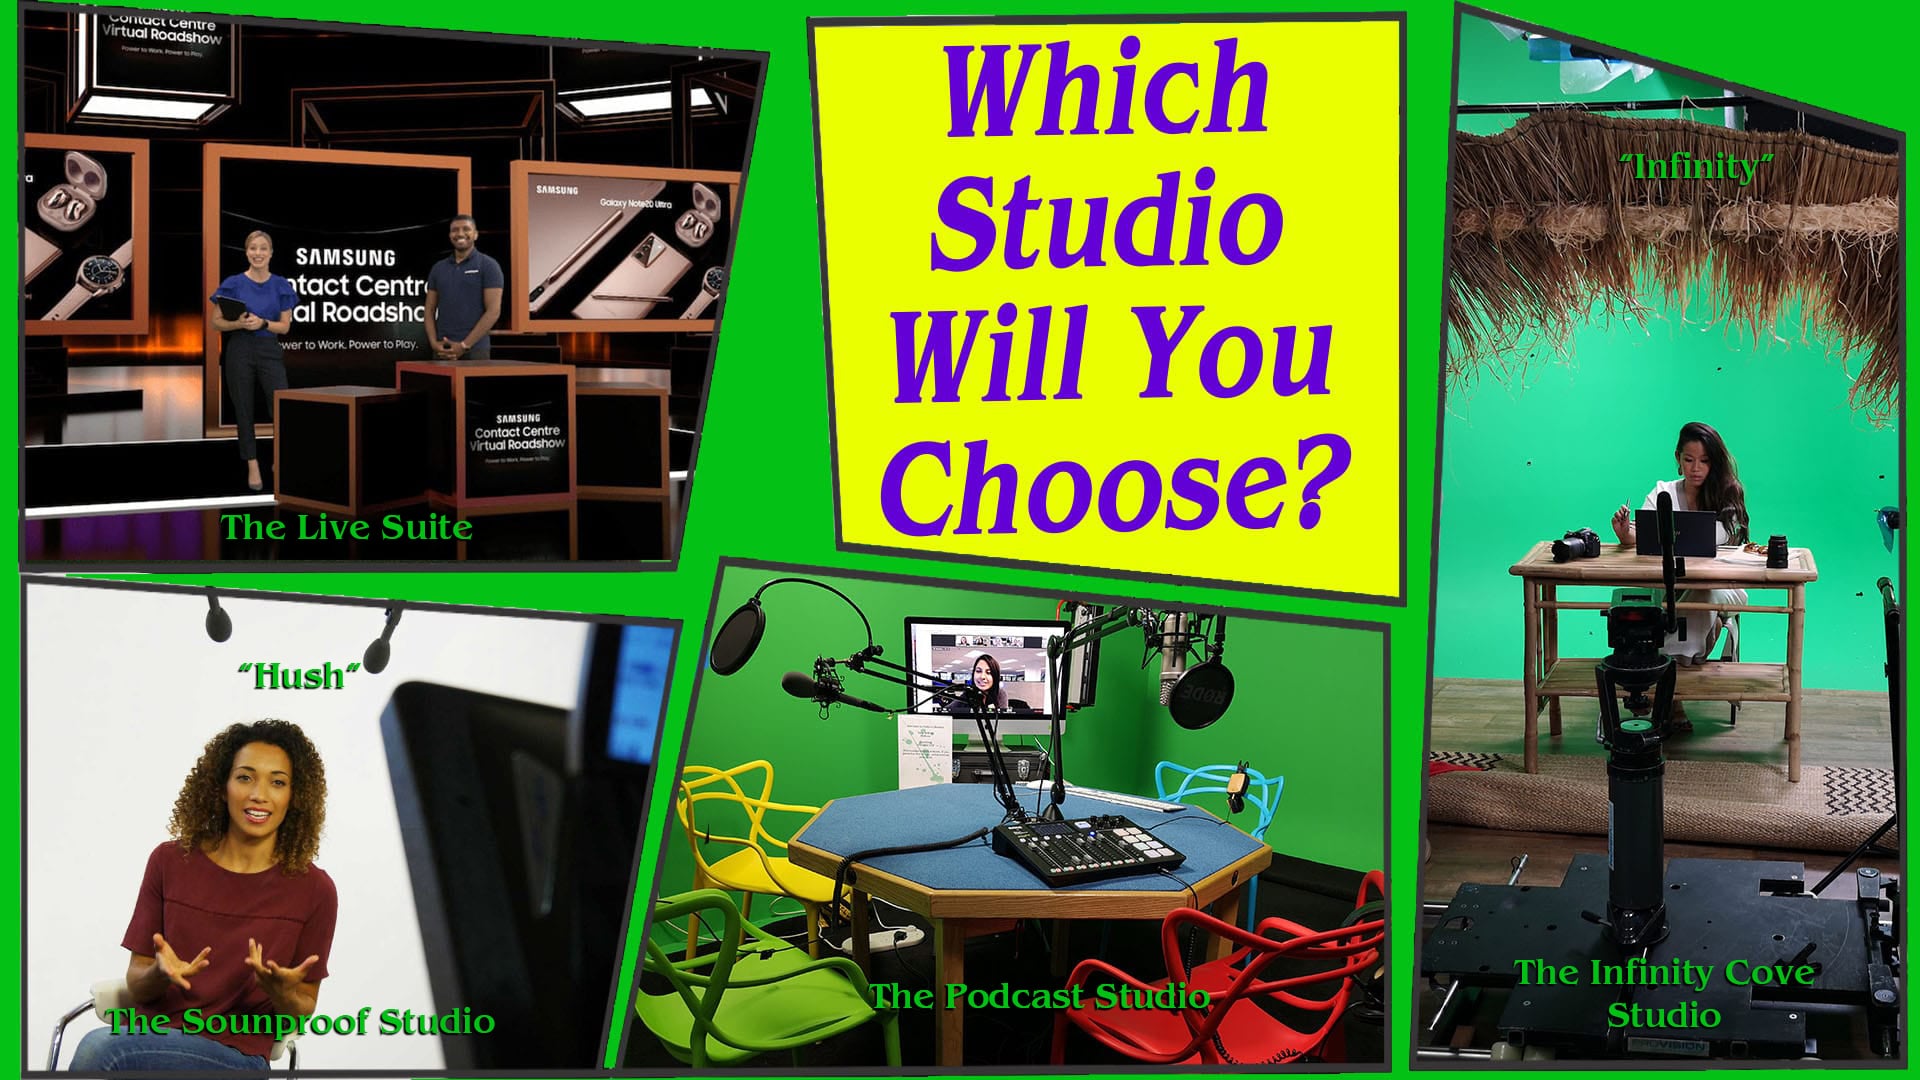 Filming studio, live streaming studio, video production studio, soundproof studio, podcast studio with the question which would you hire?